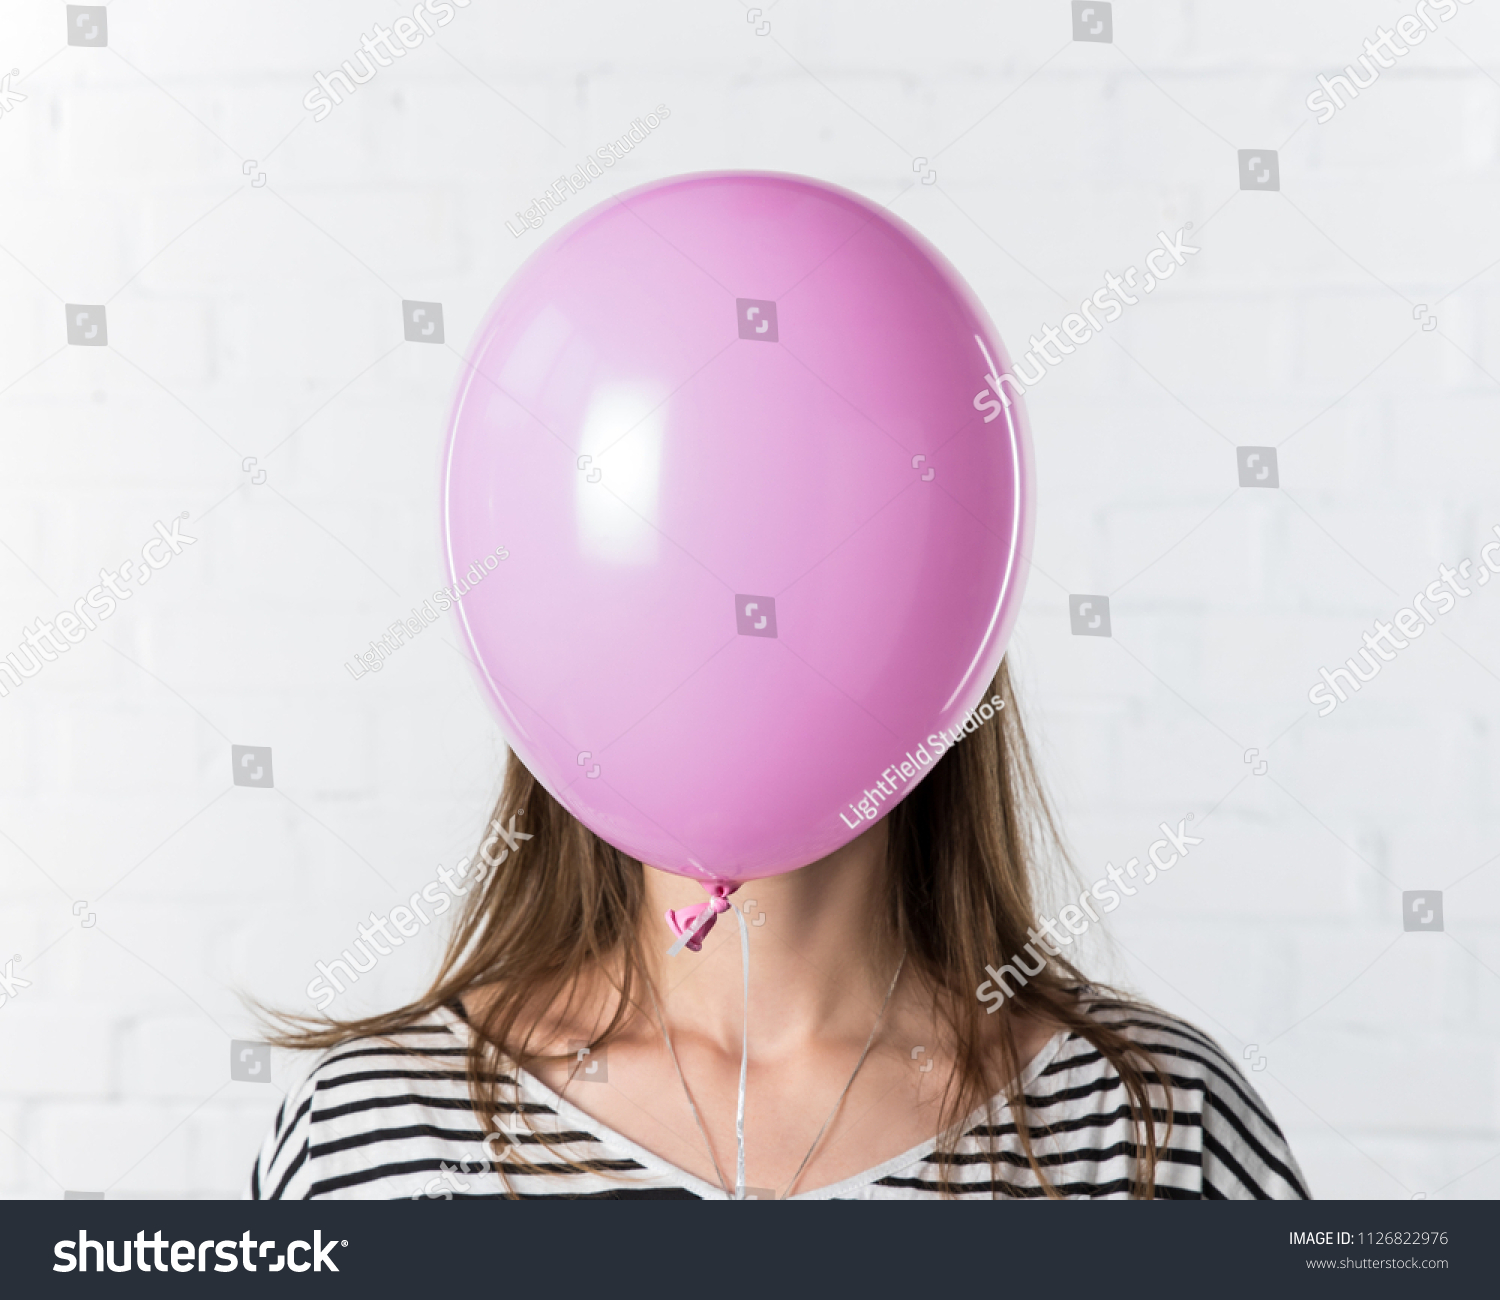 Pink Balloon Covering Face Young Woman Stock Photo 1126822976 ...